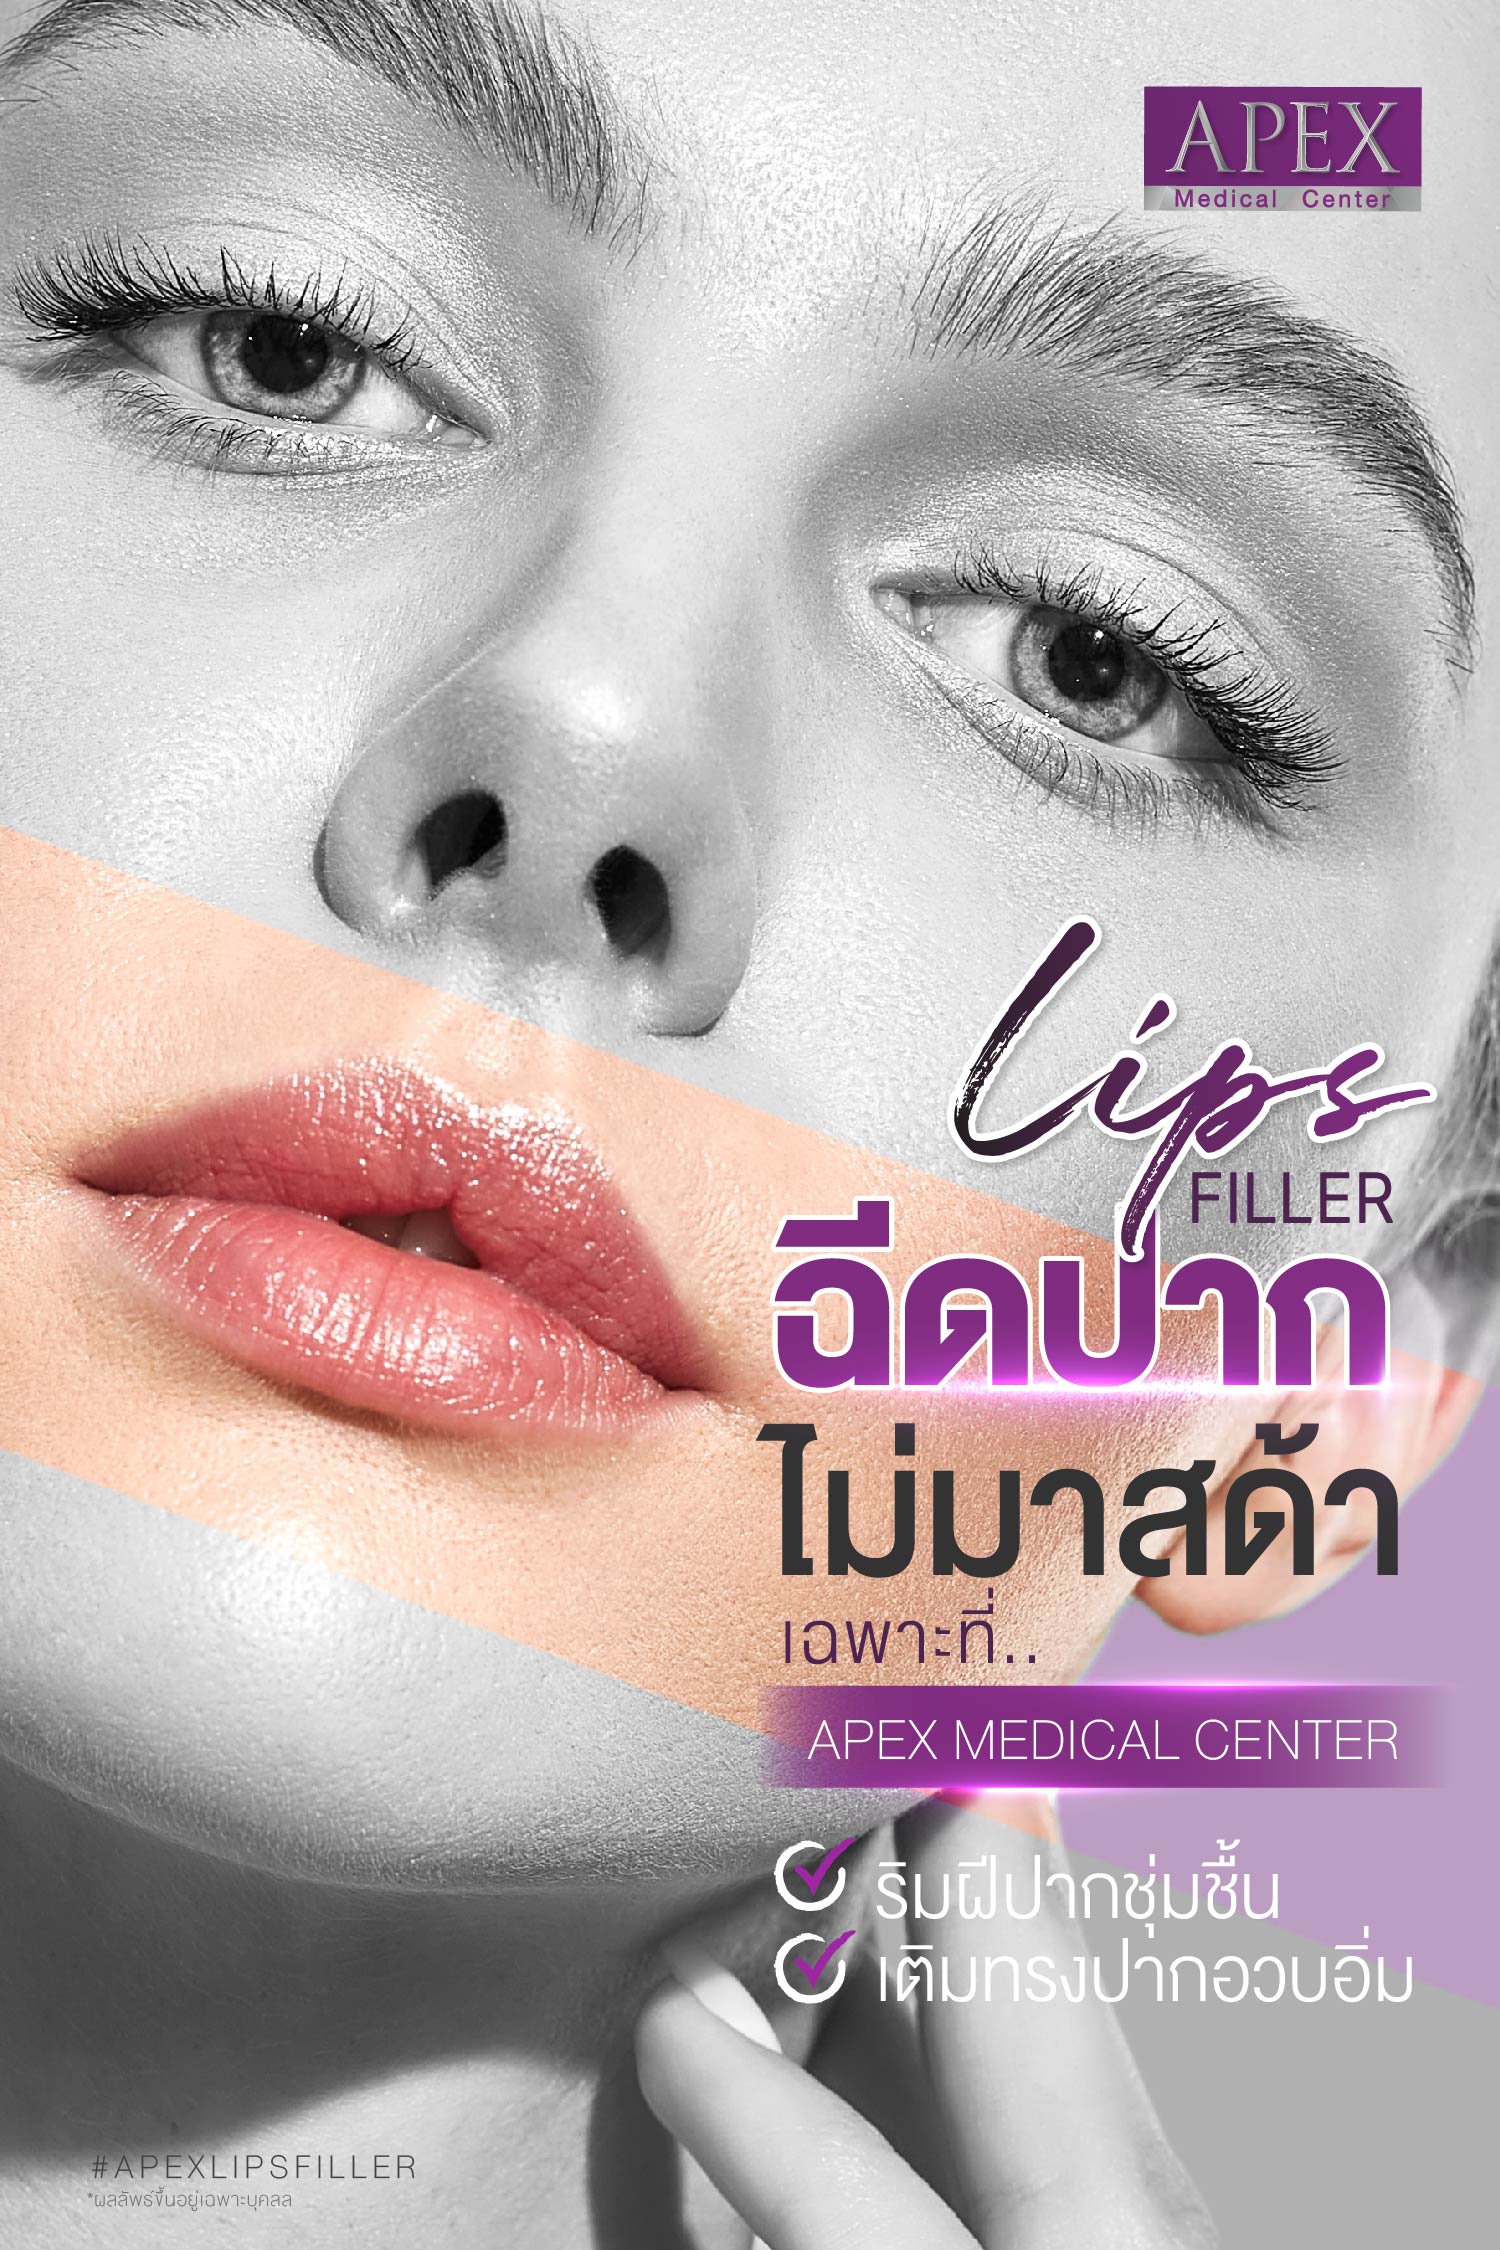 Lip fillers are one of the most popular types of dermal filler